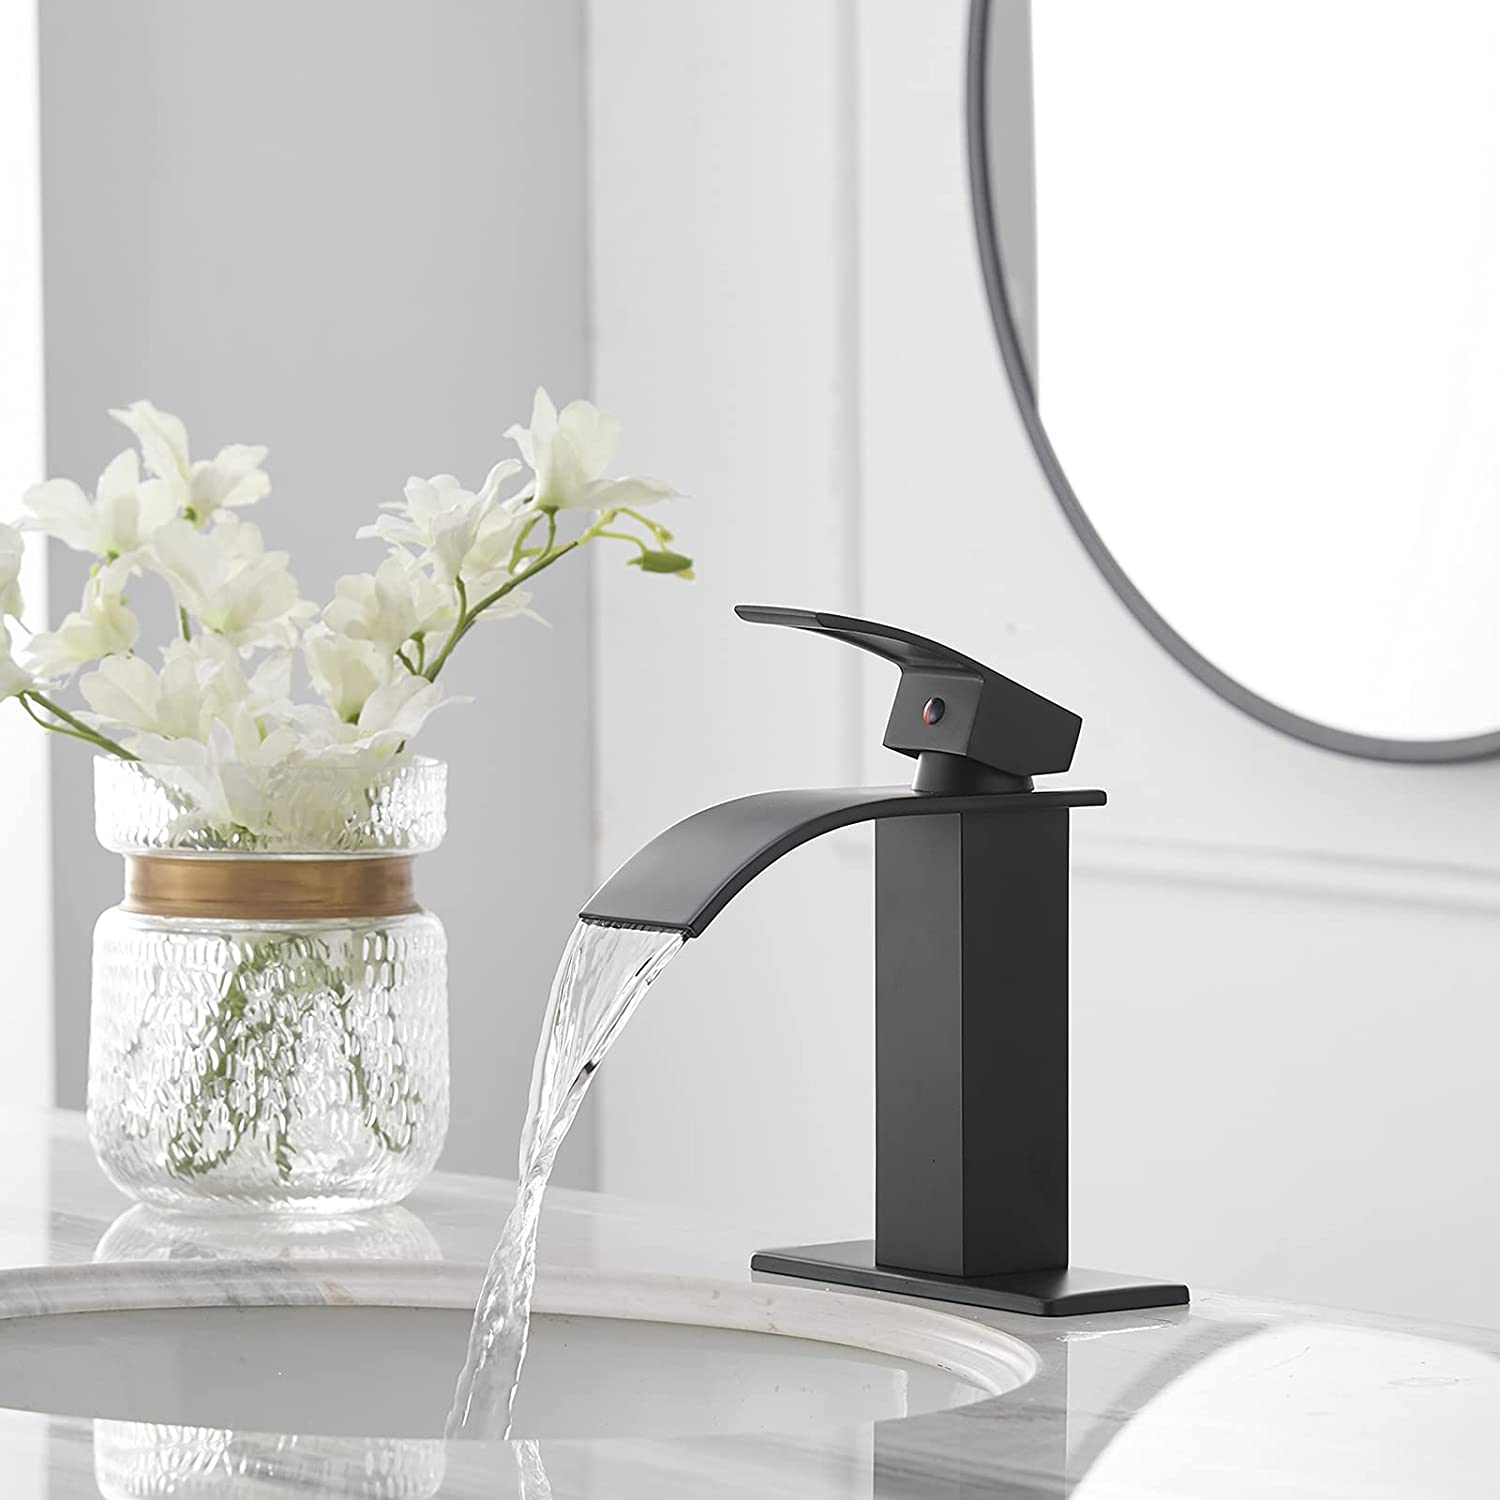 1 Handle Waterfall Spout Faucets Black